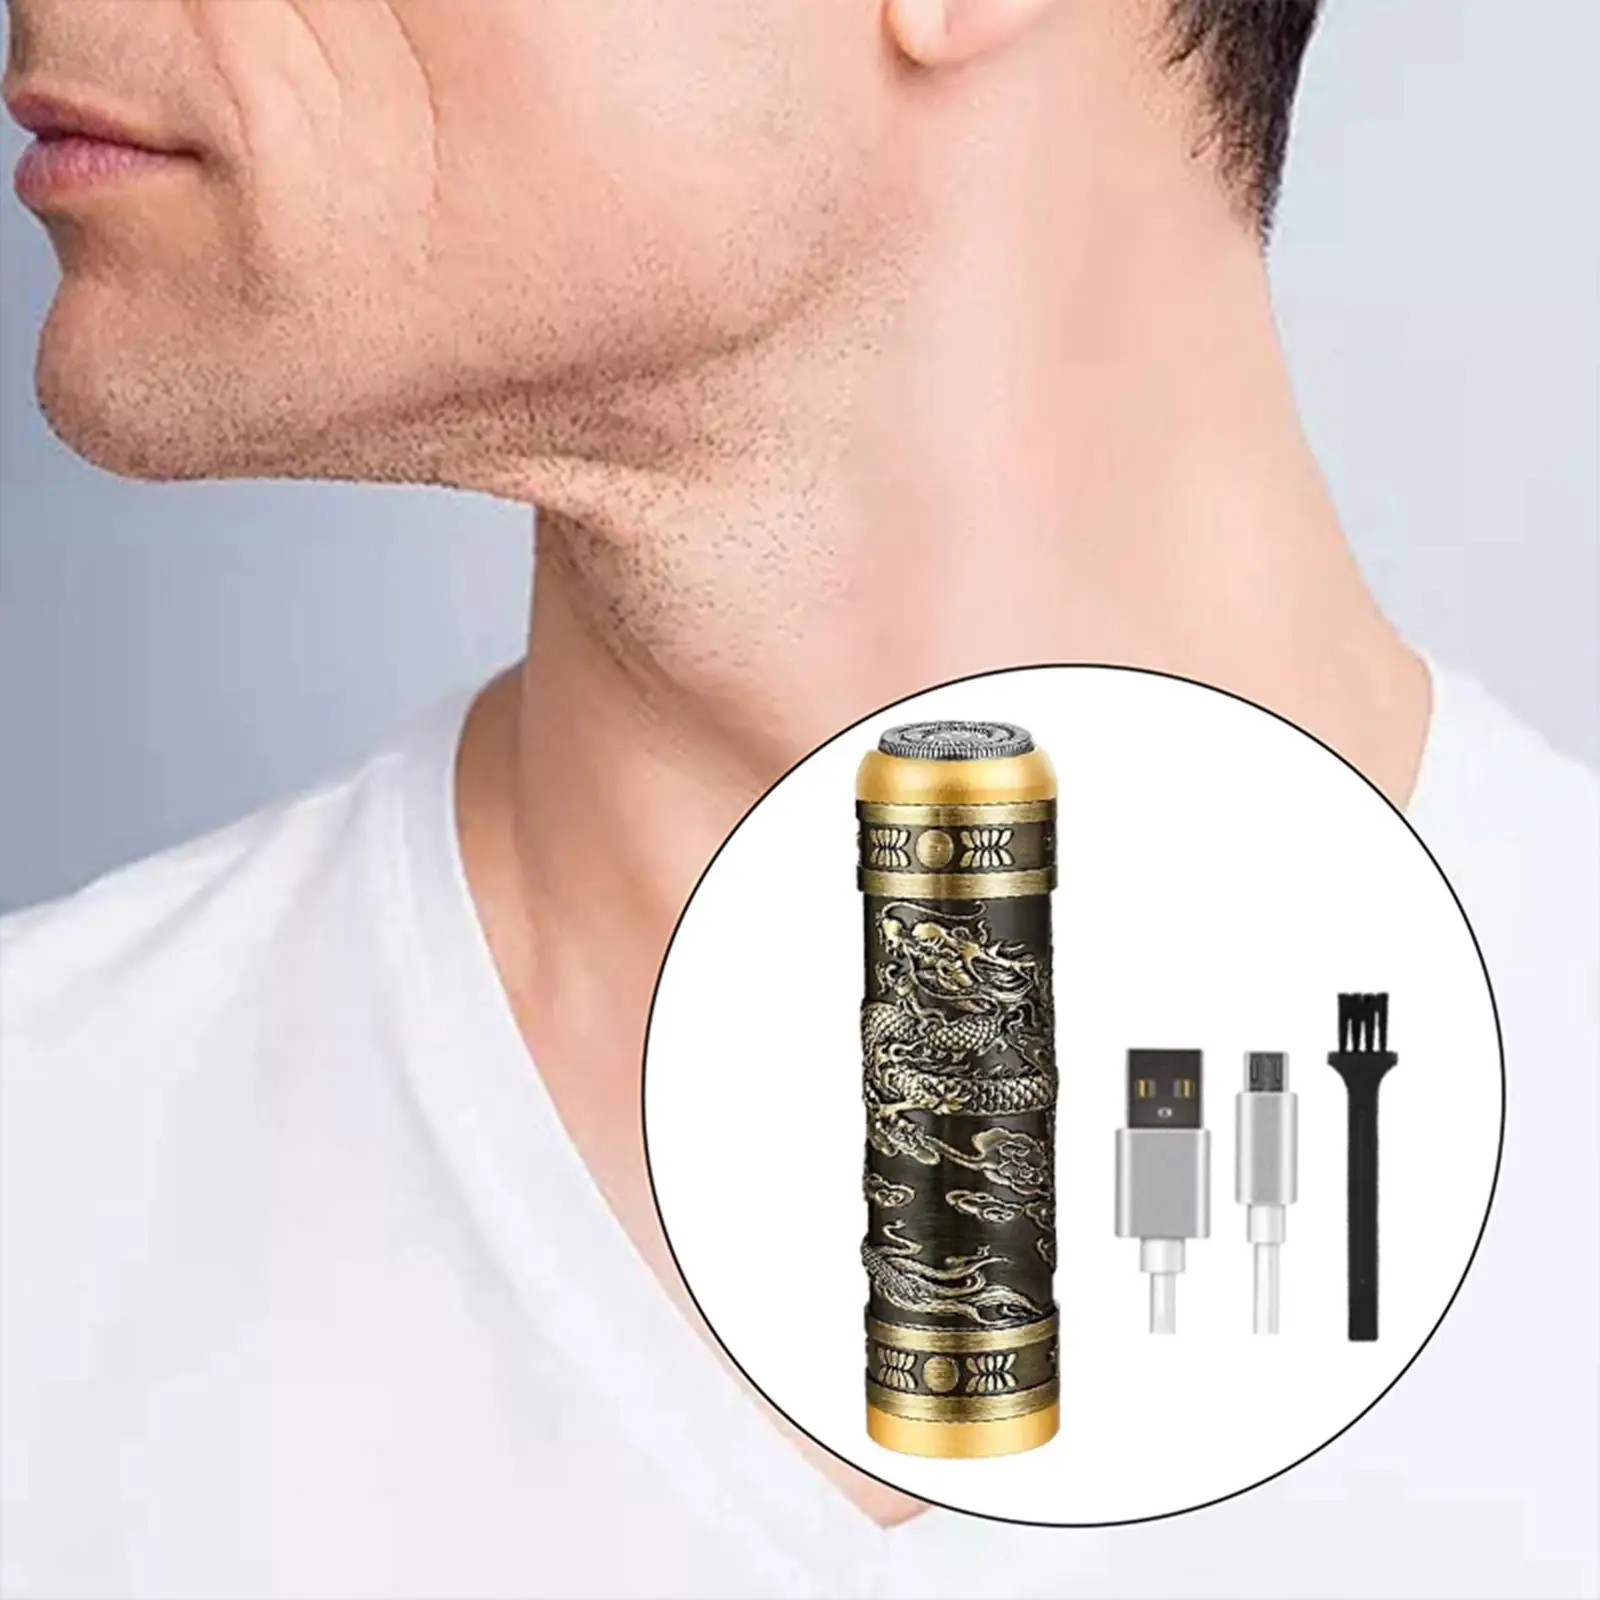 Compact Mini Electric Razor Small Face Shaver Beard Trimmer Wet and Dry Use Shaving Machine Rechargeable Shaver for Travel Trip